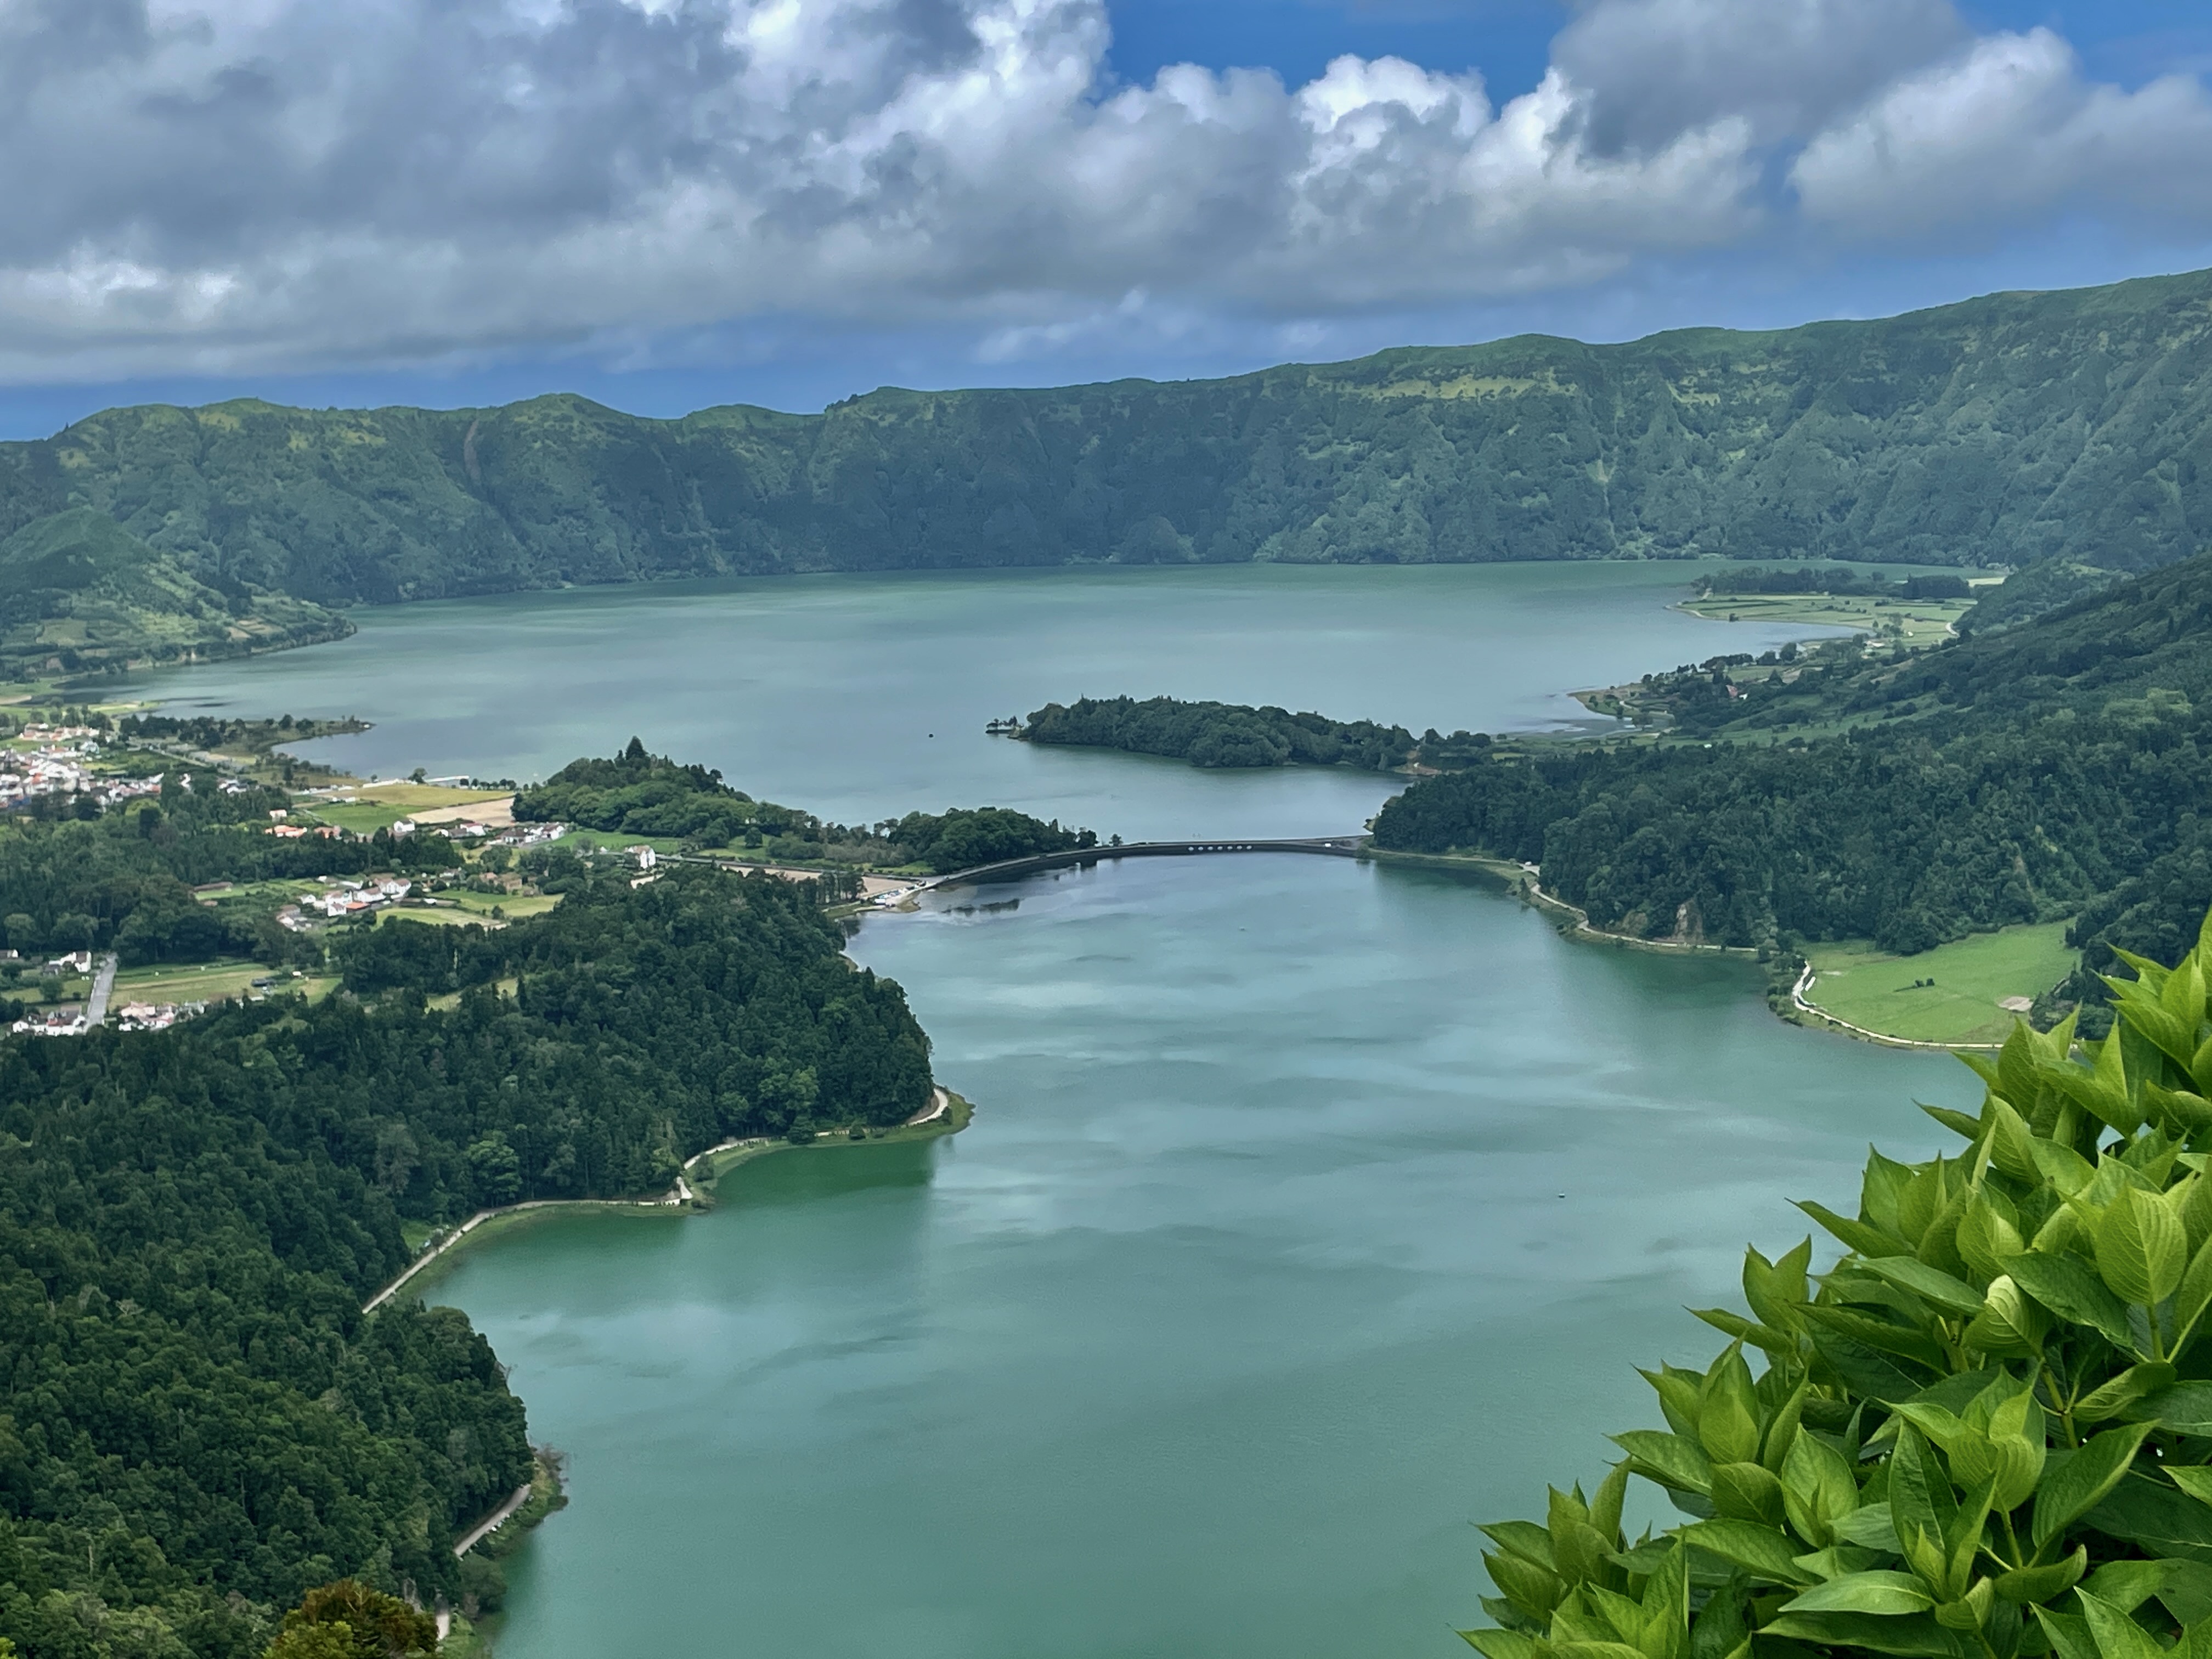 Aerial view of the Lagoa das Sete Cidades in São Miguel, Azores, showcasing the vibrant dual lakes separated by a bridge, surrounded by lush greenery and a quaint town under a cloudy sky.